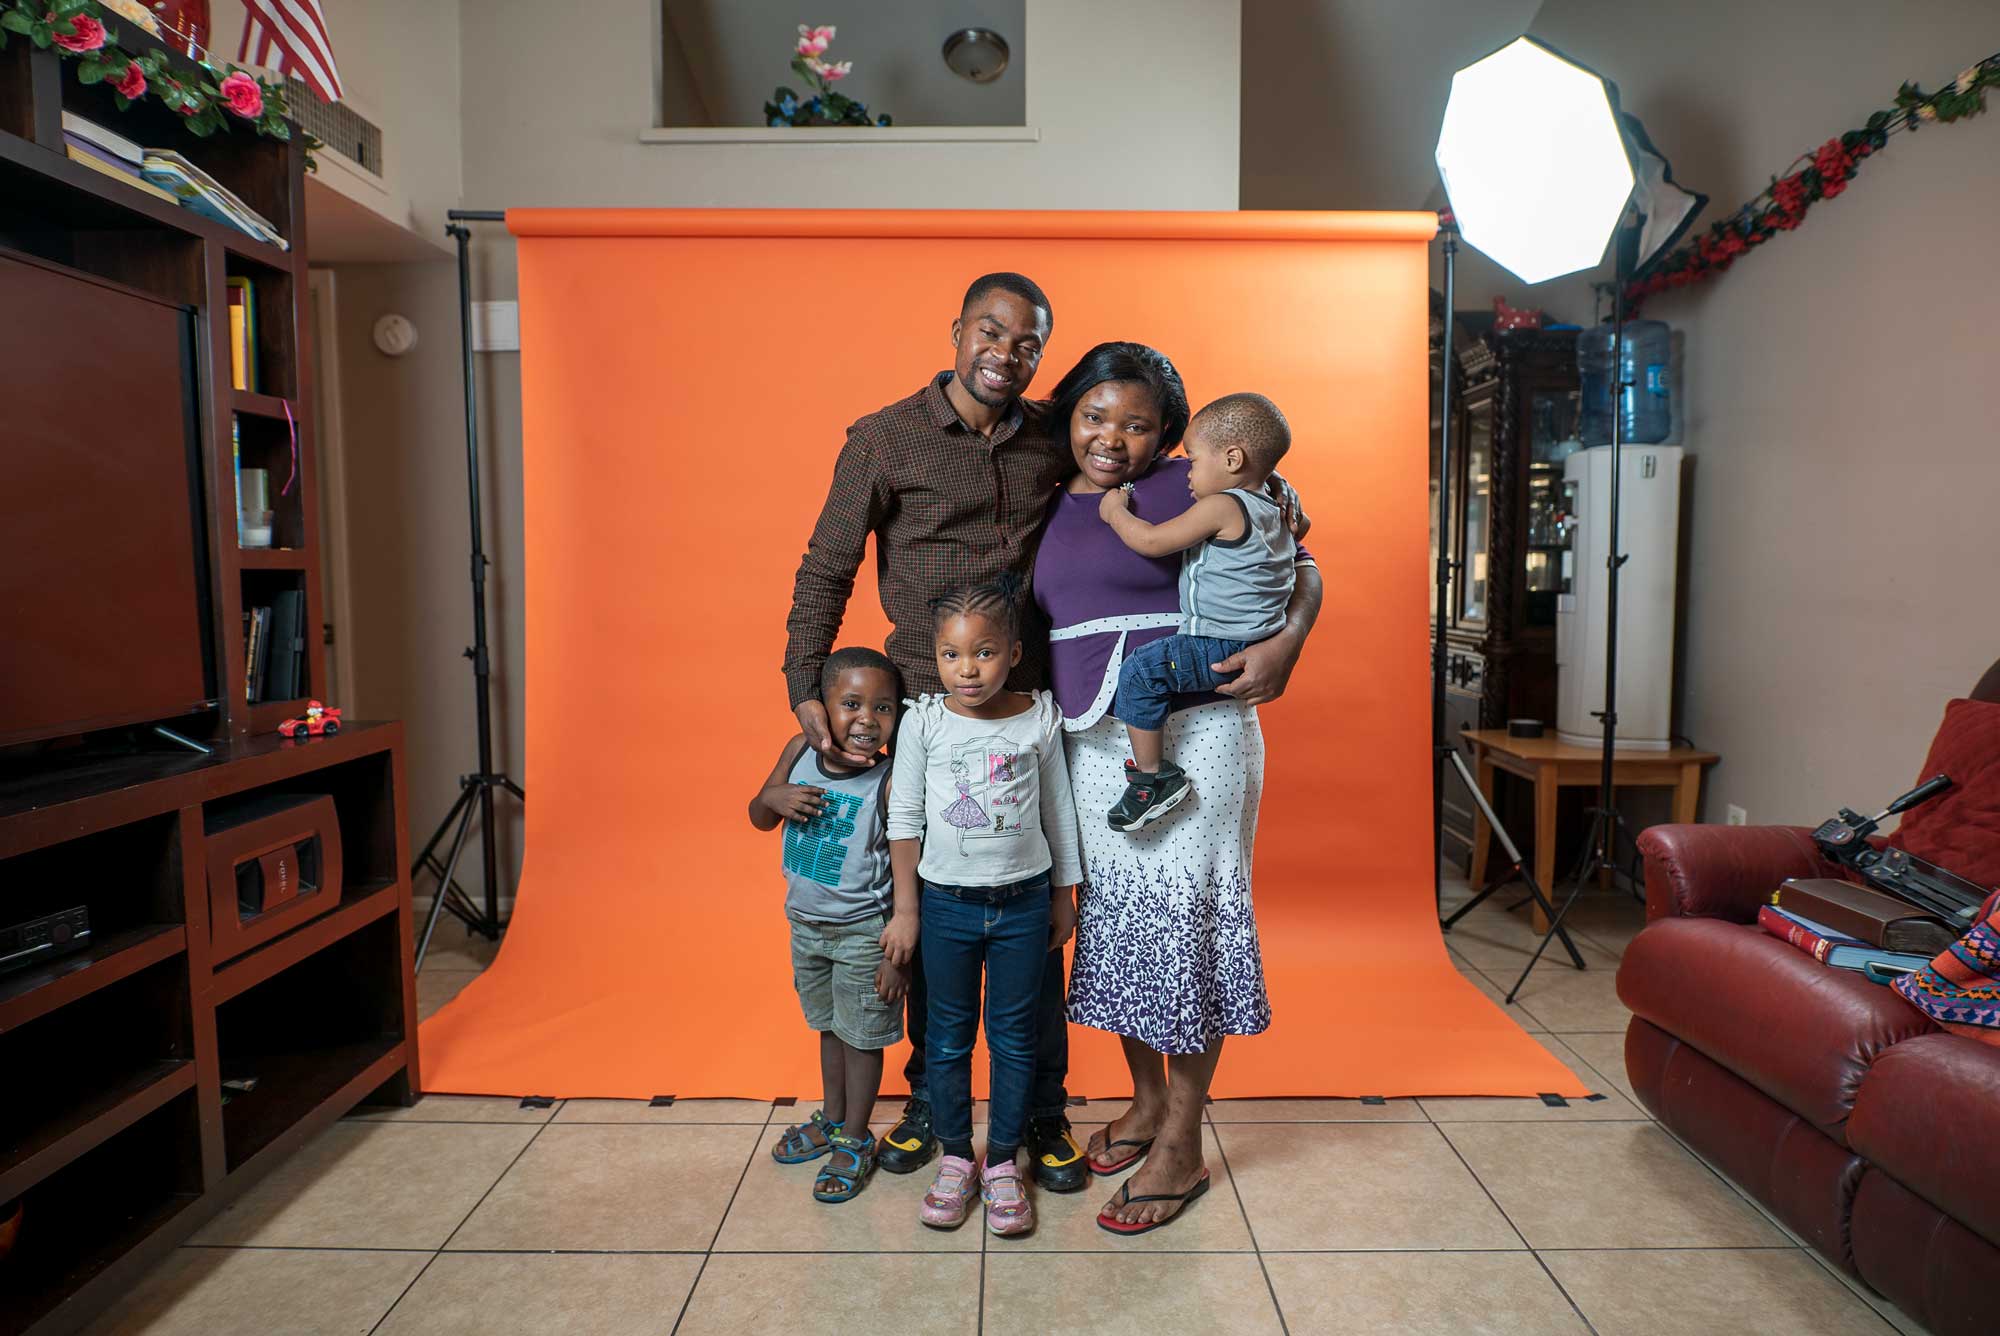 Portrait of a refugee family standing in their home. IRC/AOberstadt